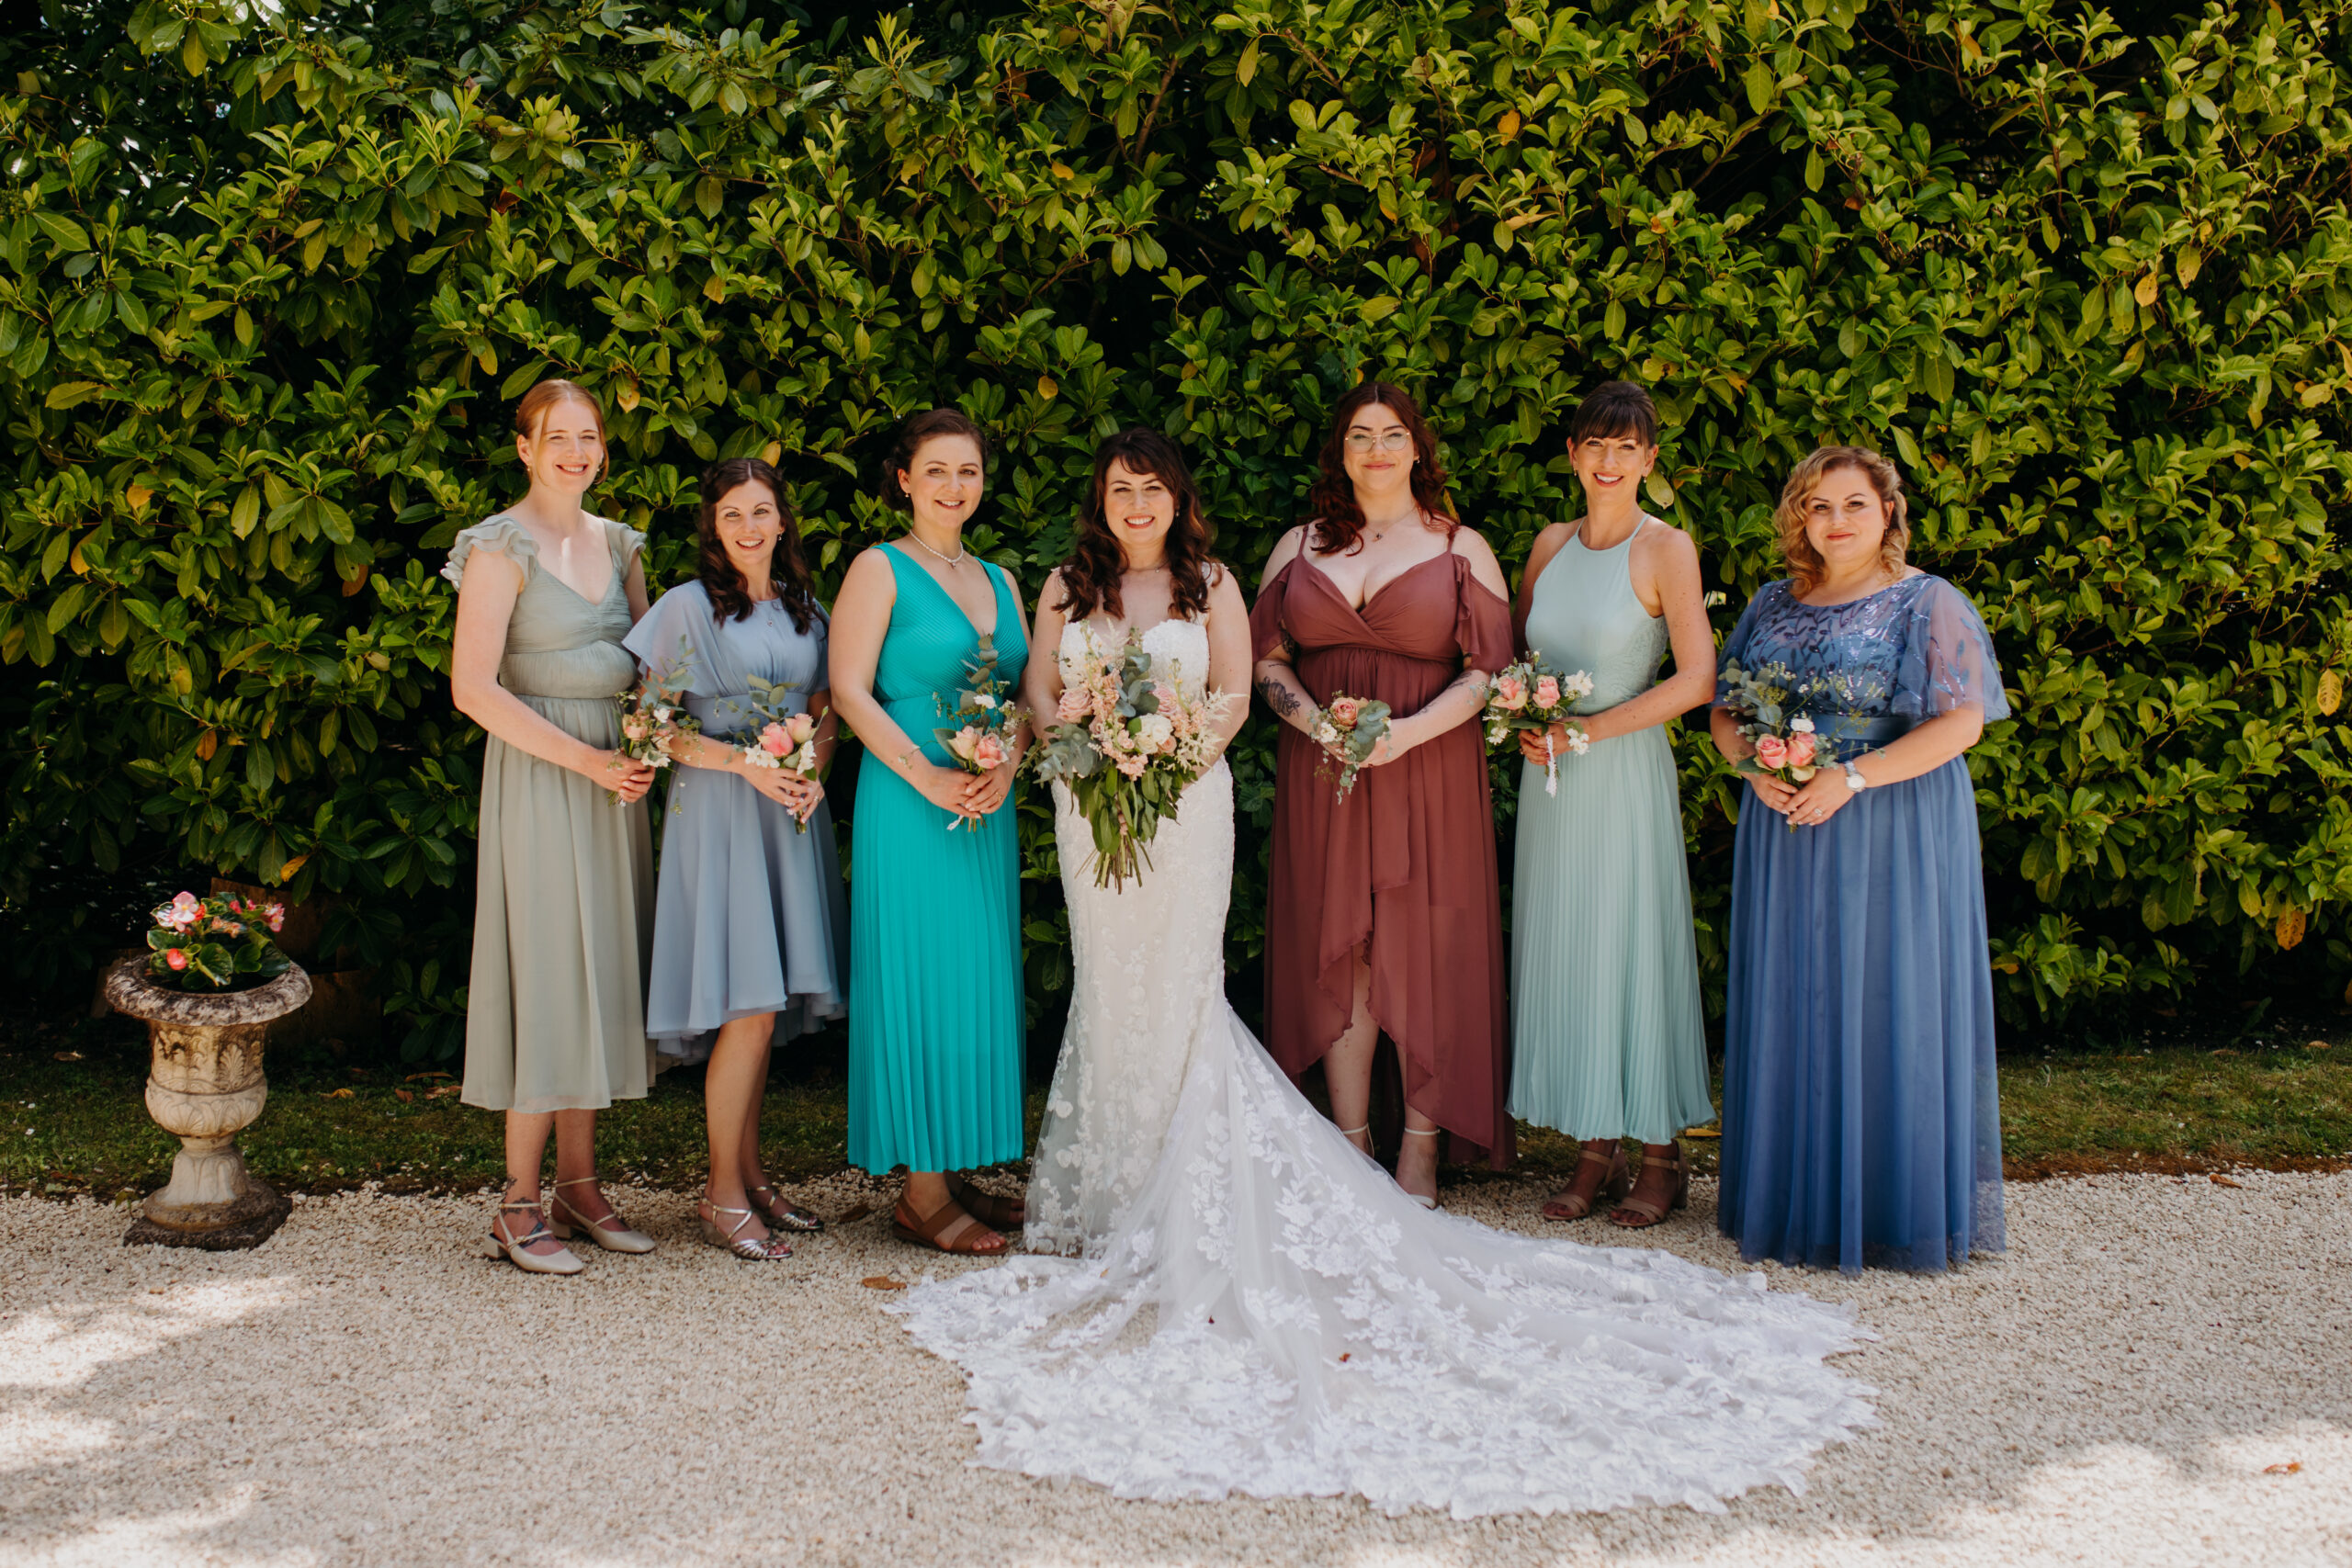 women in different dresses gather outside in front of ivy wall with bride in center